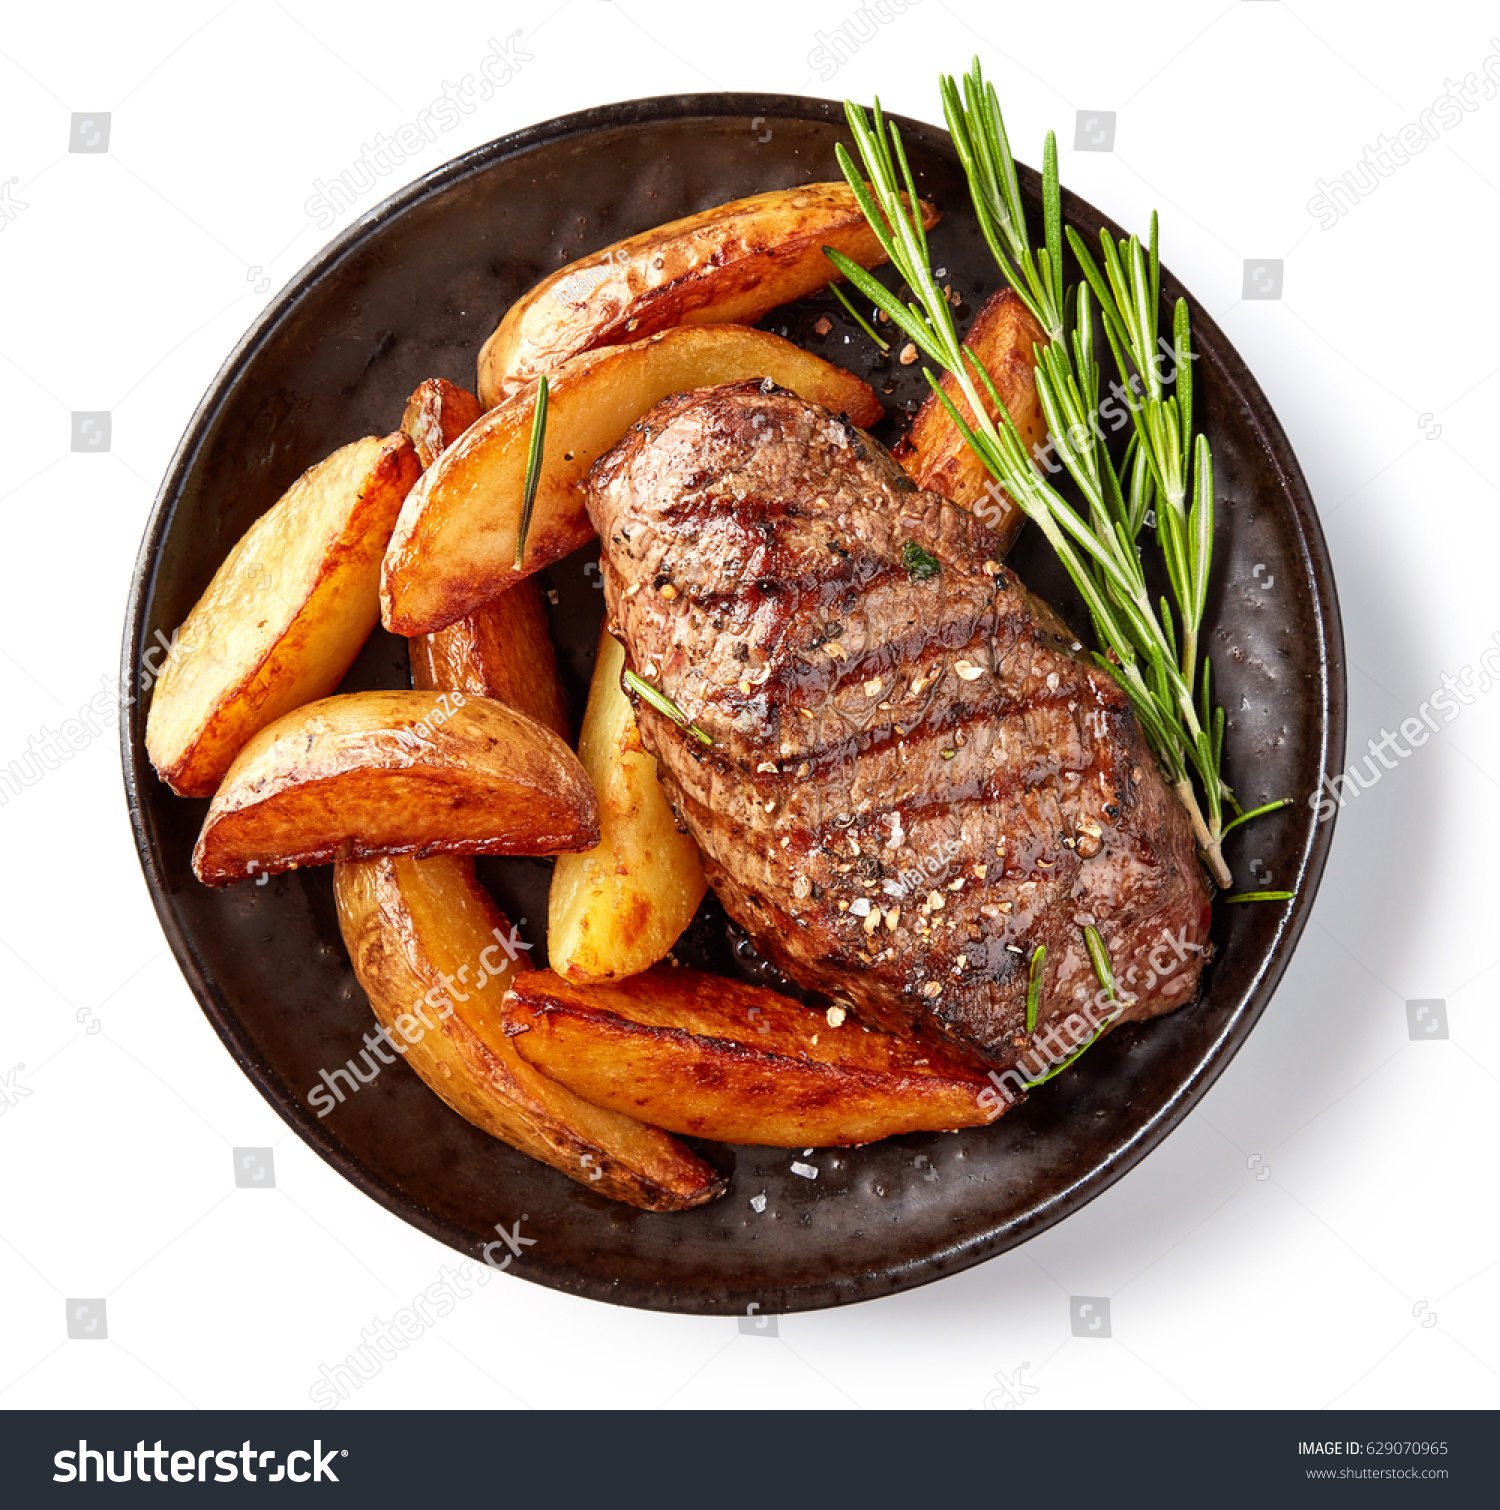 grilled beef steak and potatoes on plate isolated on white background, top view #629070965